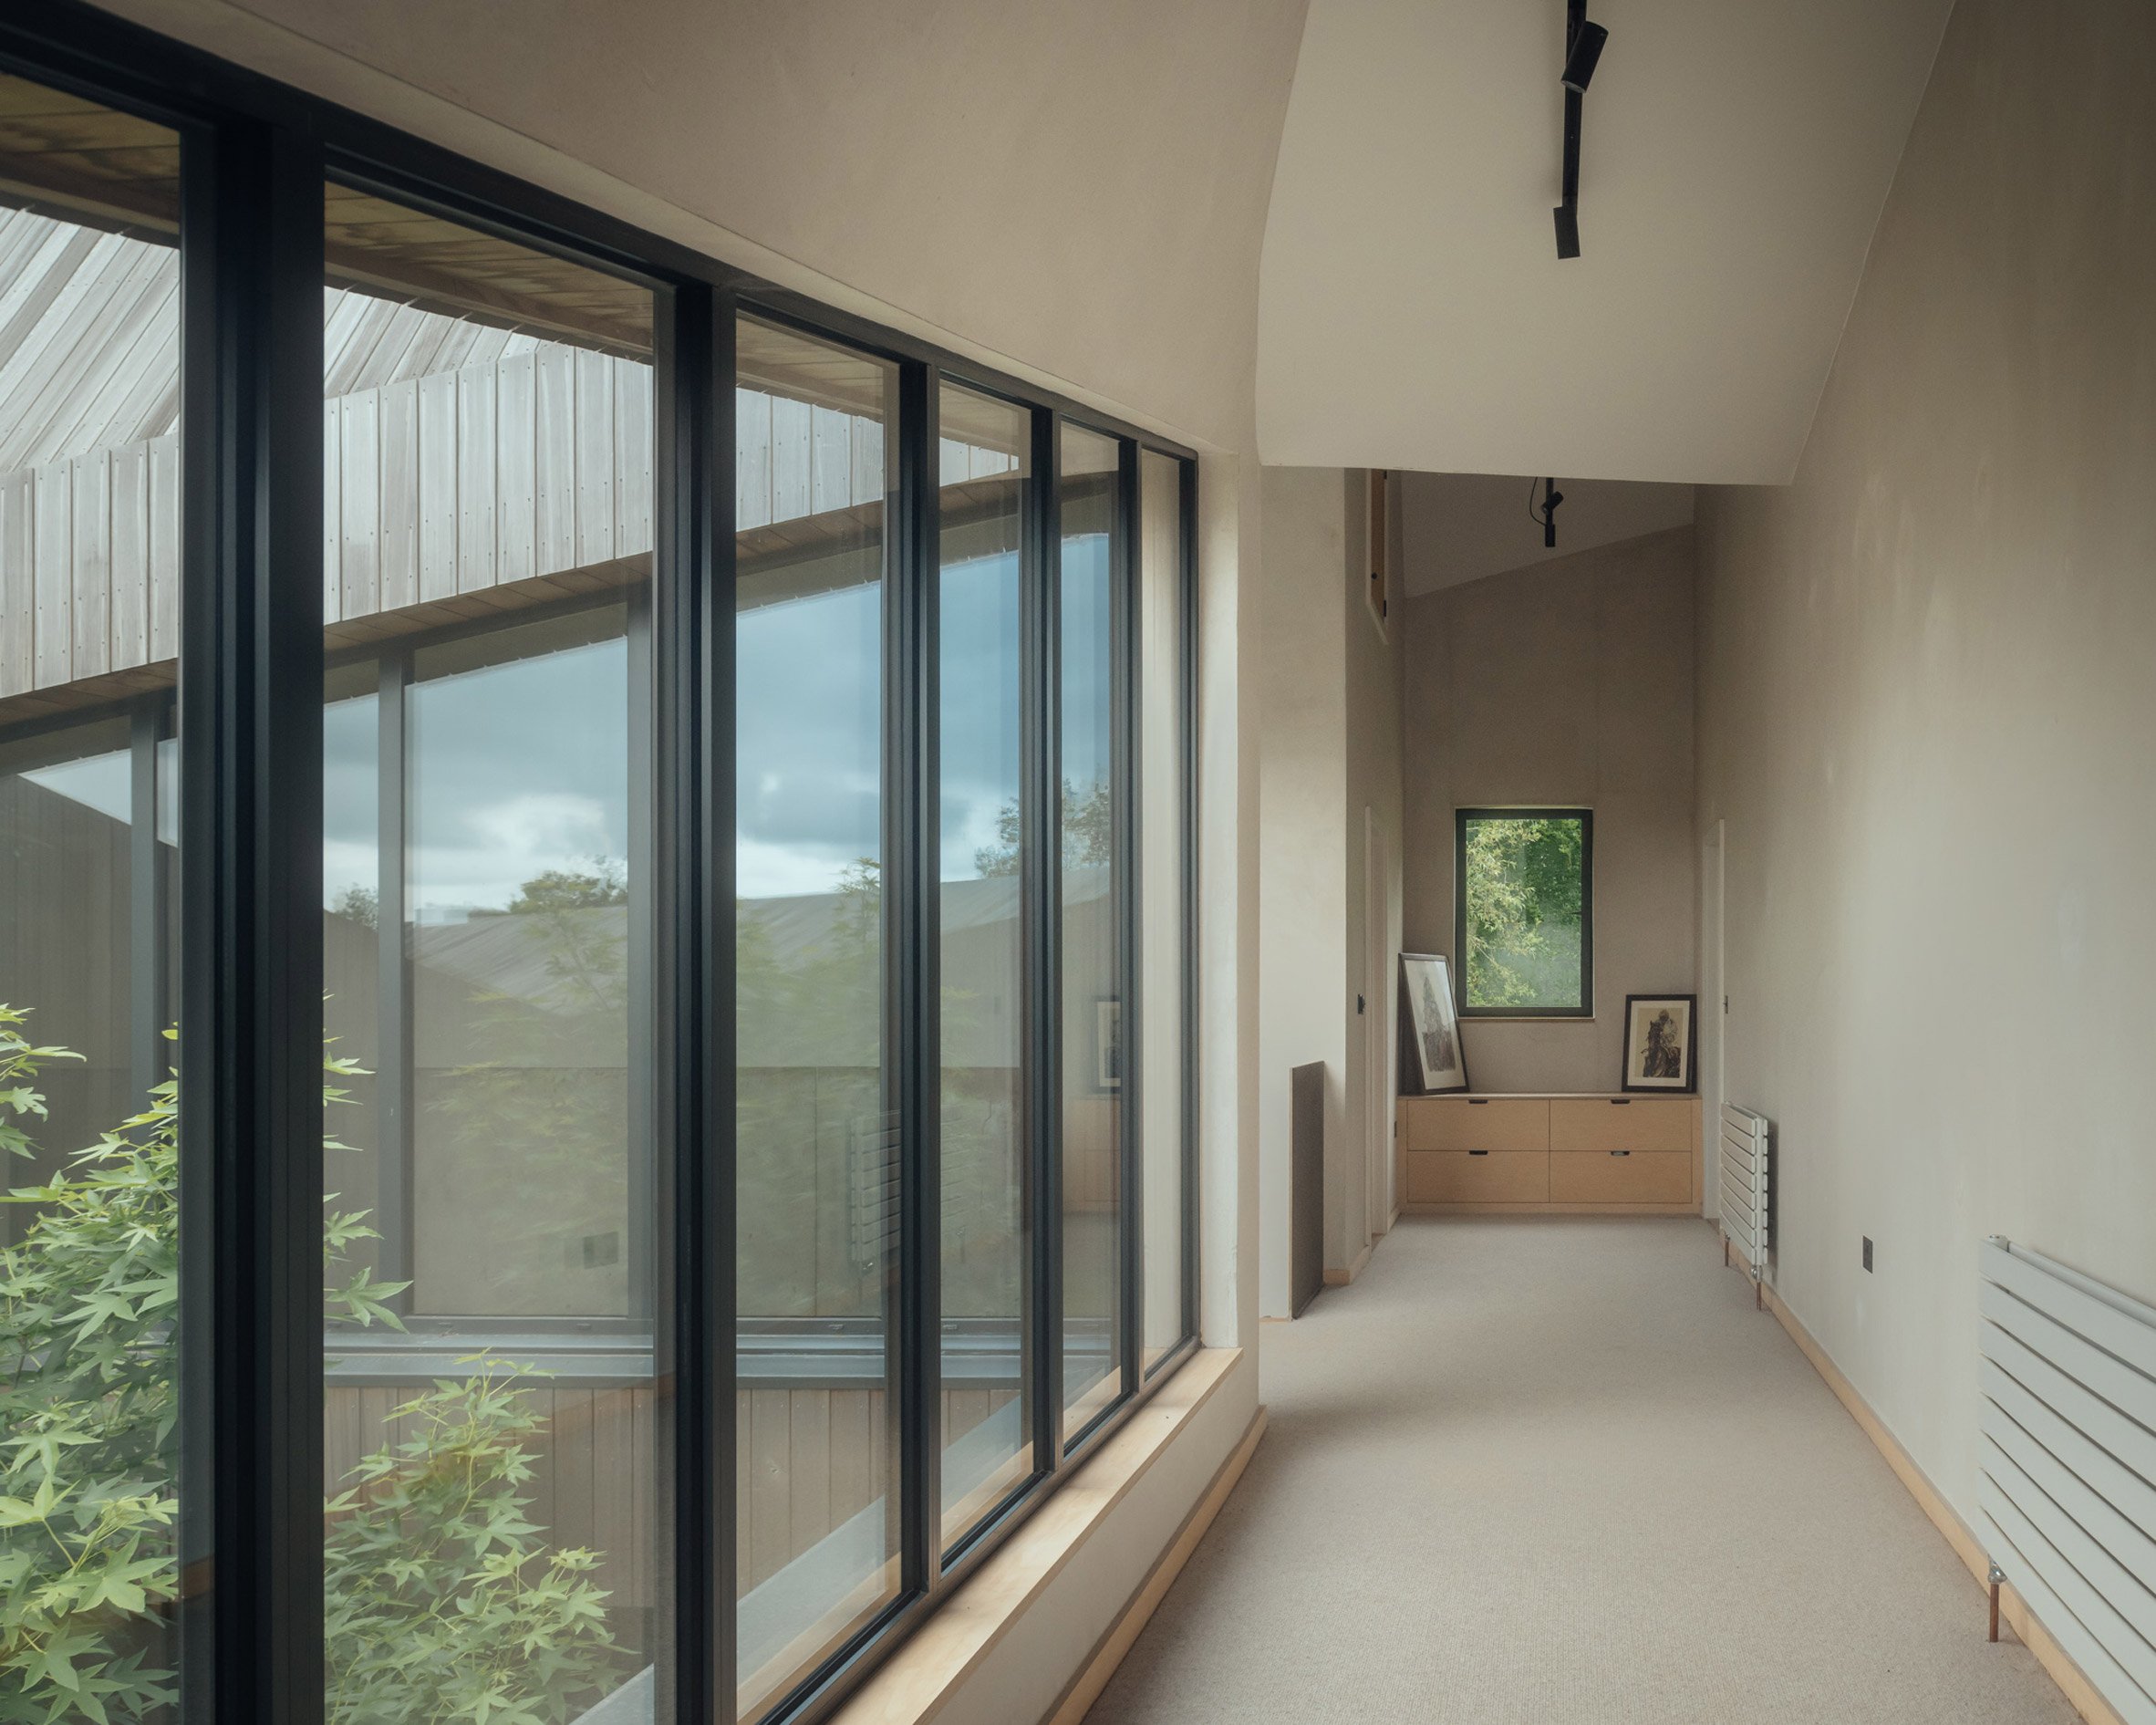 Upstairs corridor in a home overlooking a courtyard